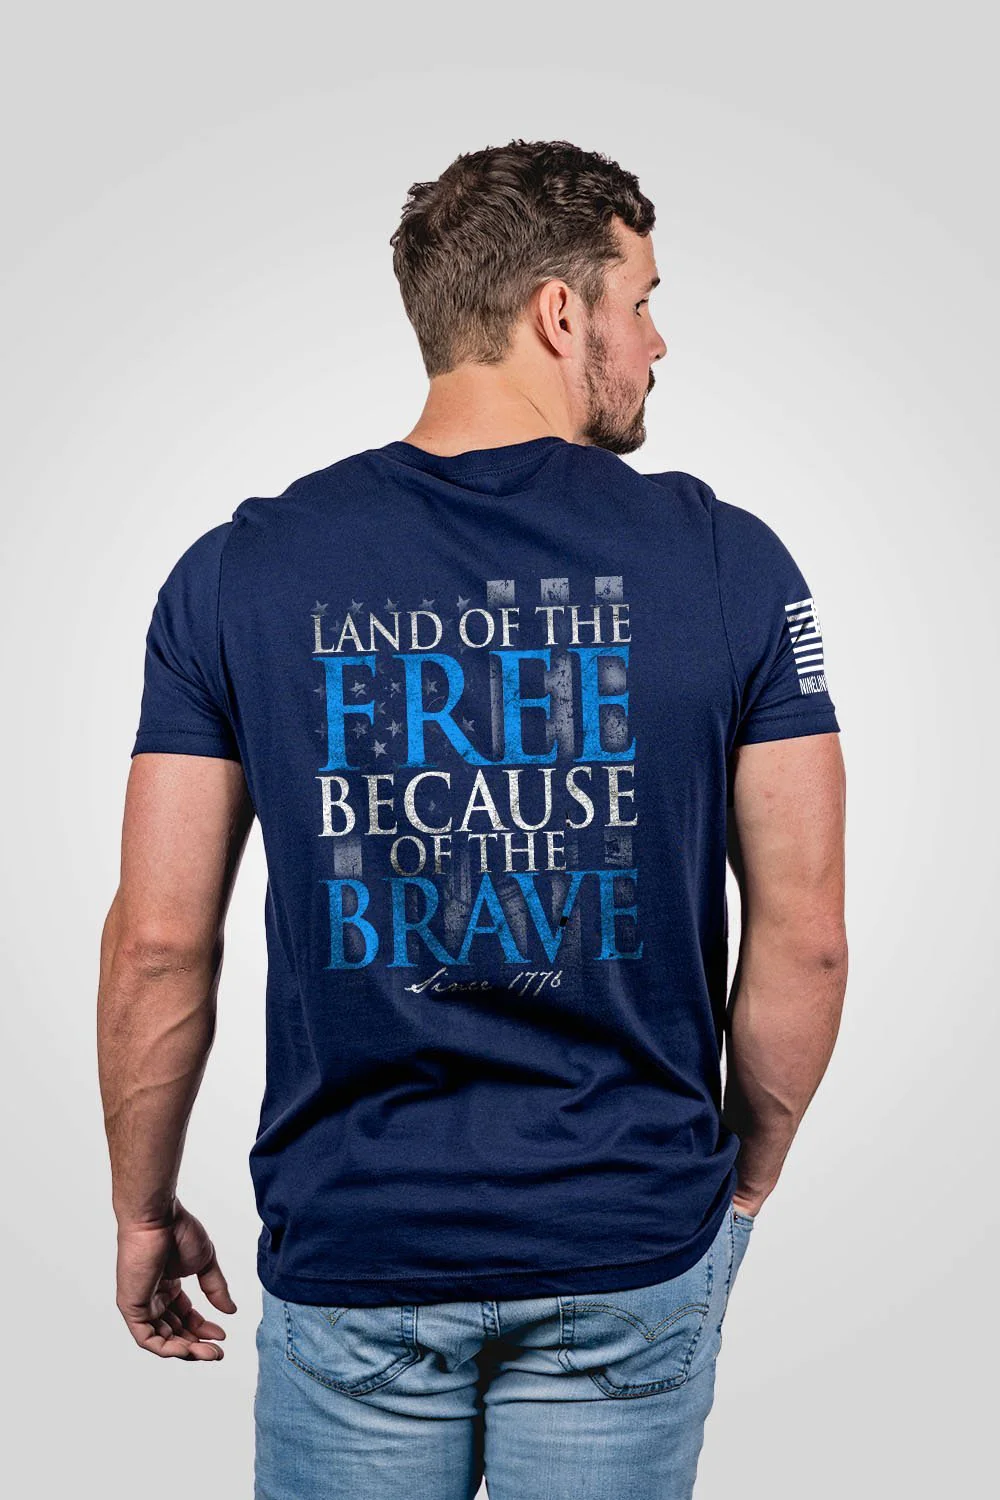 Nine Line Men's Because Of The Brave T-Shirt posted by ProdOrigin USA in Men's Apparel